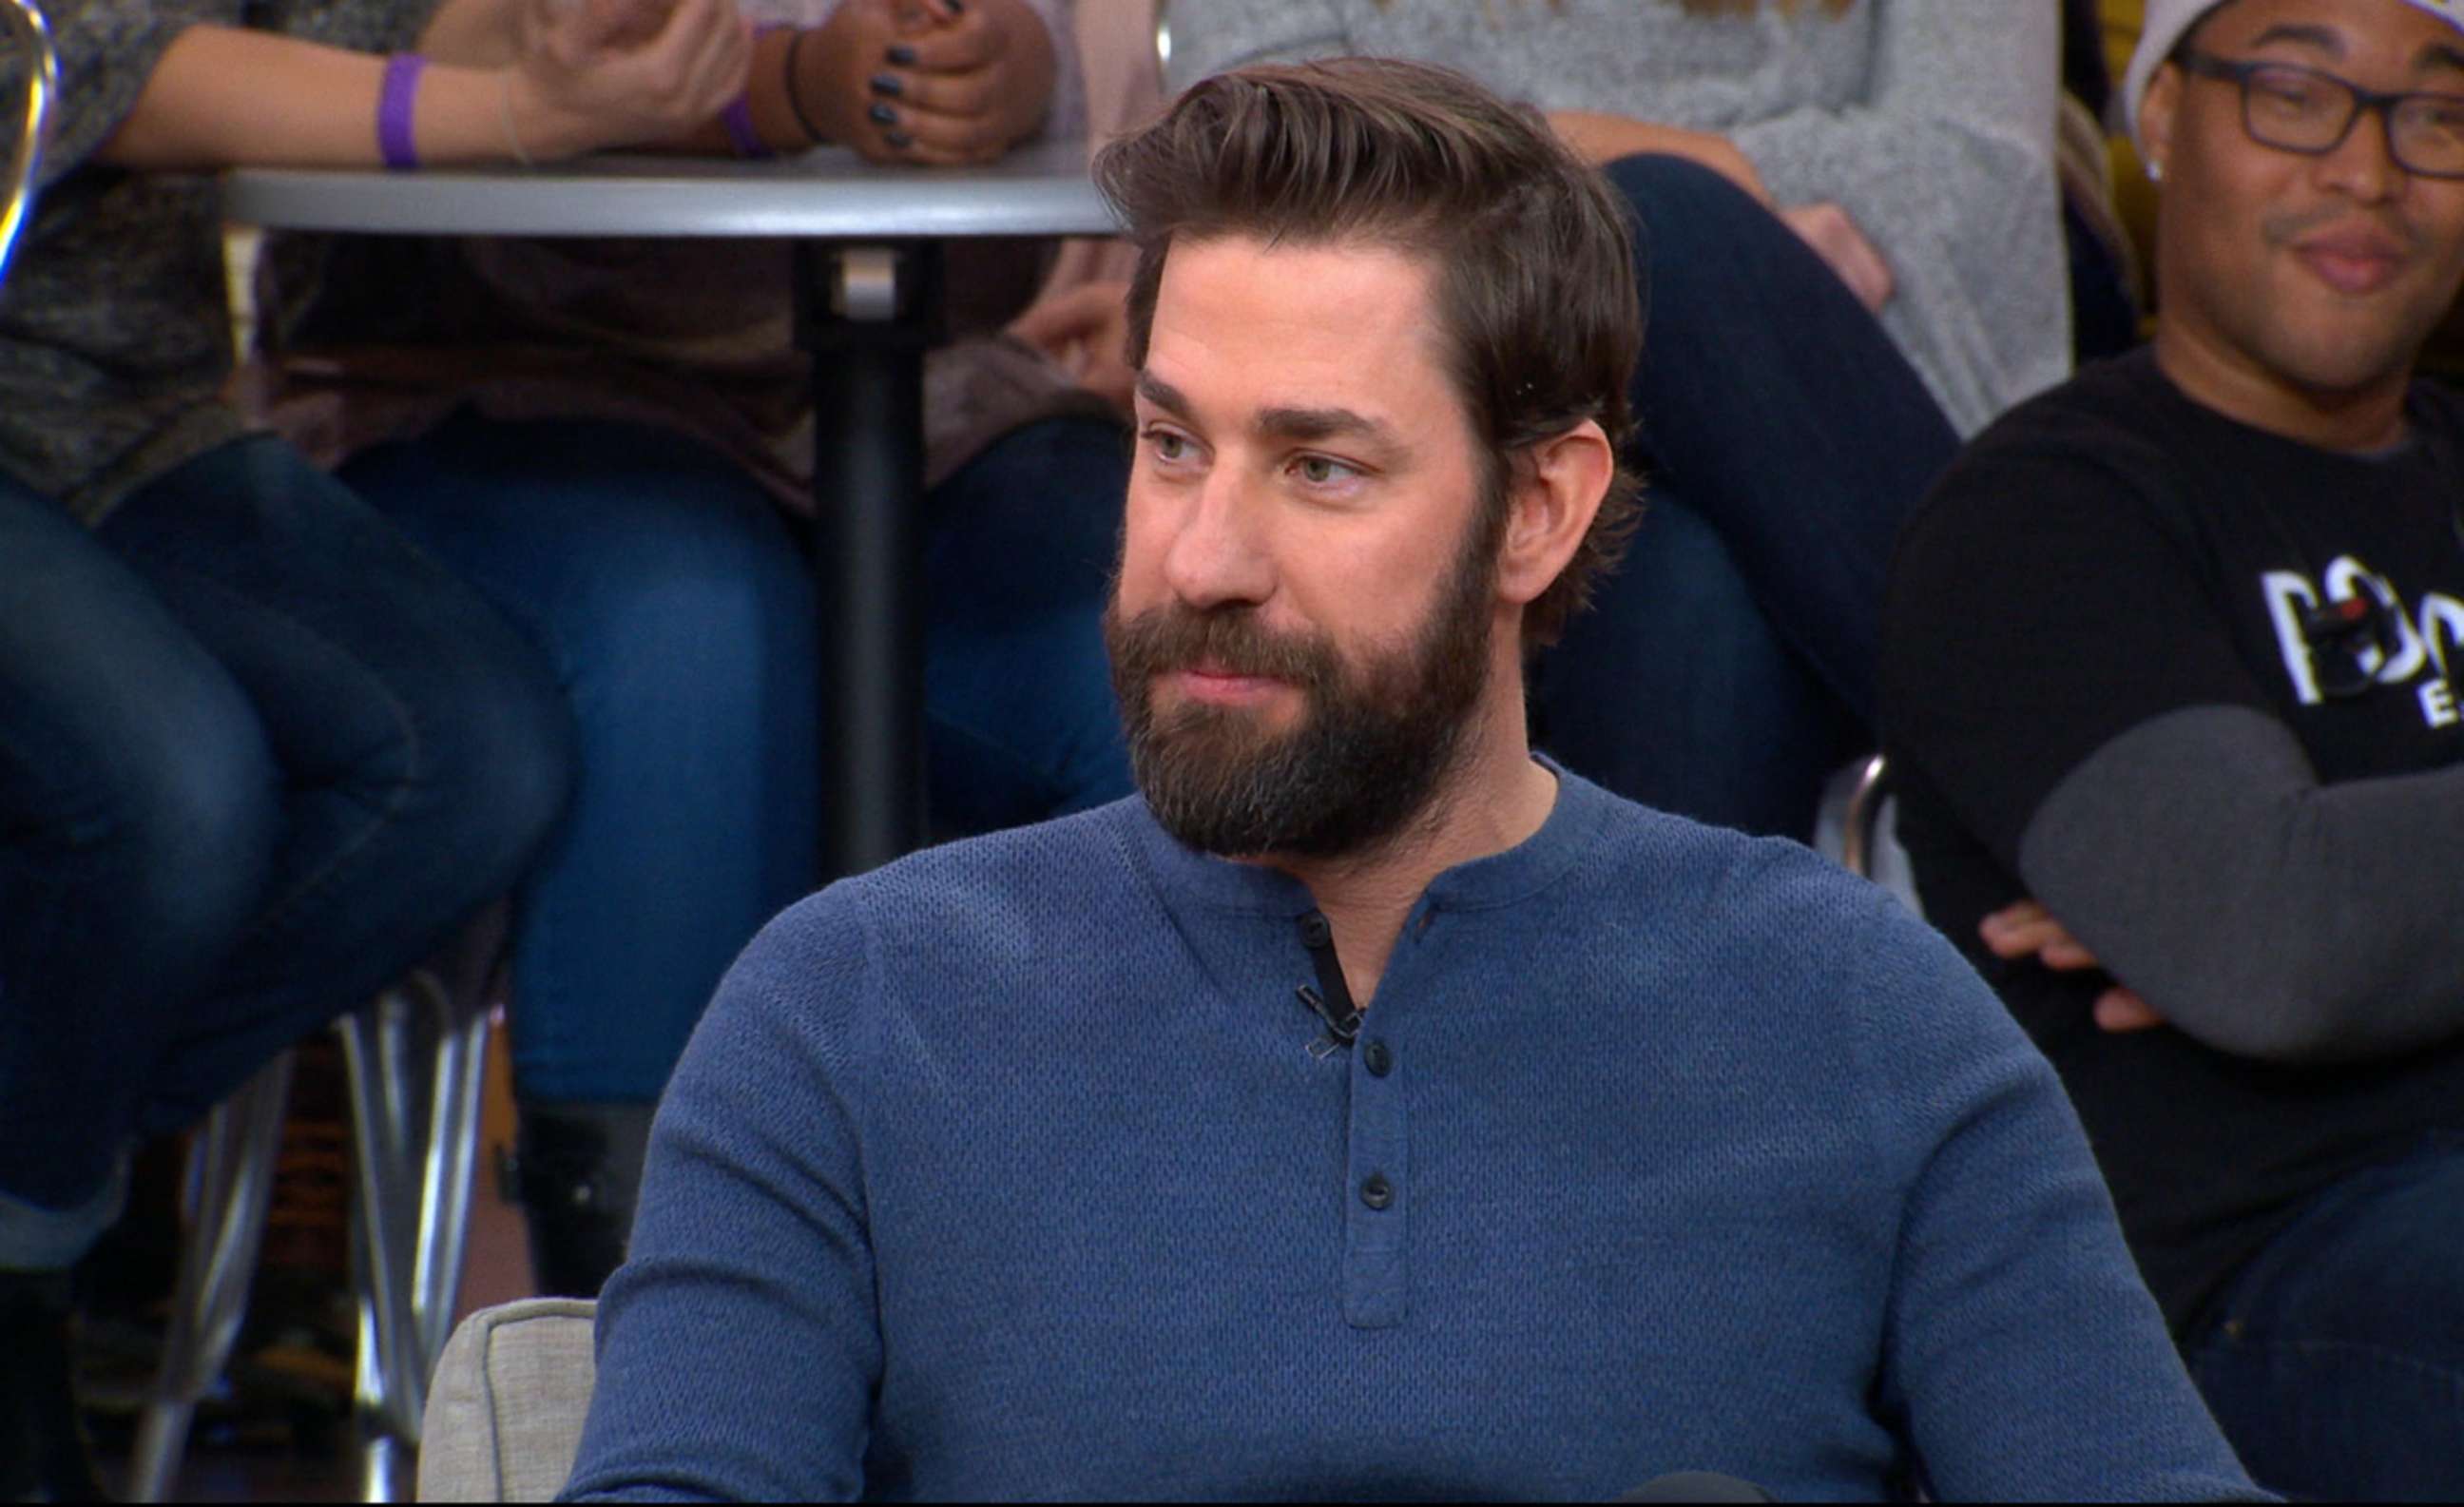 PHOTO: John Krasinski stopped by ABC's "Good Morning America" to discuss his new film, "A Quiet Place," which he co-stars in with his wife, Emily Blunt.